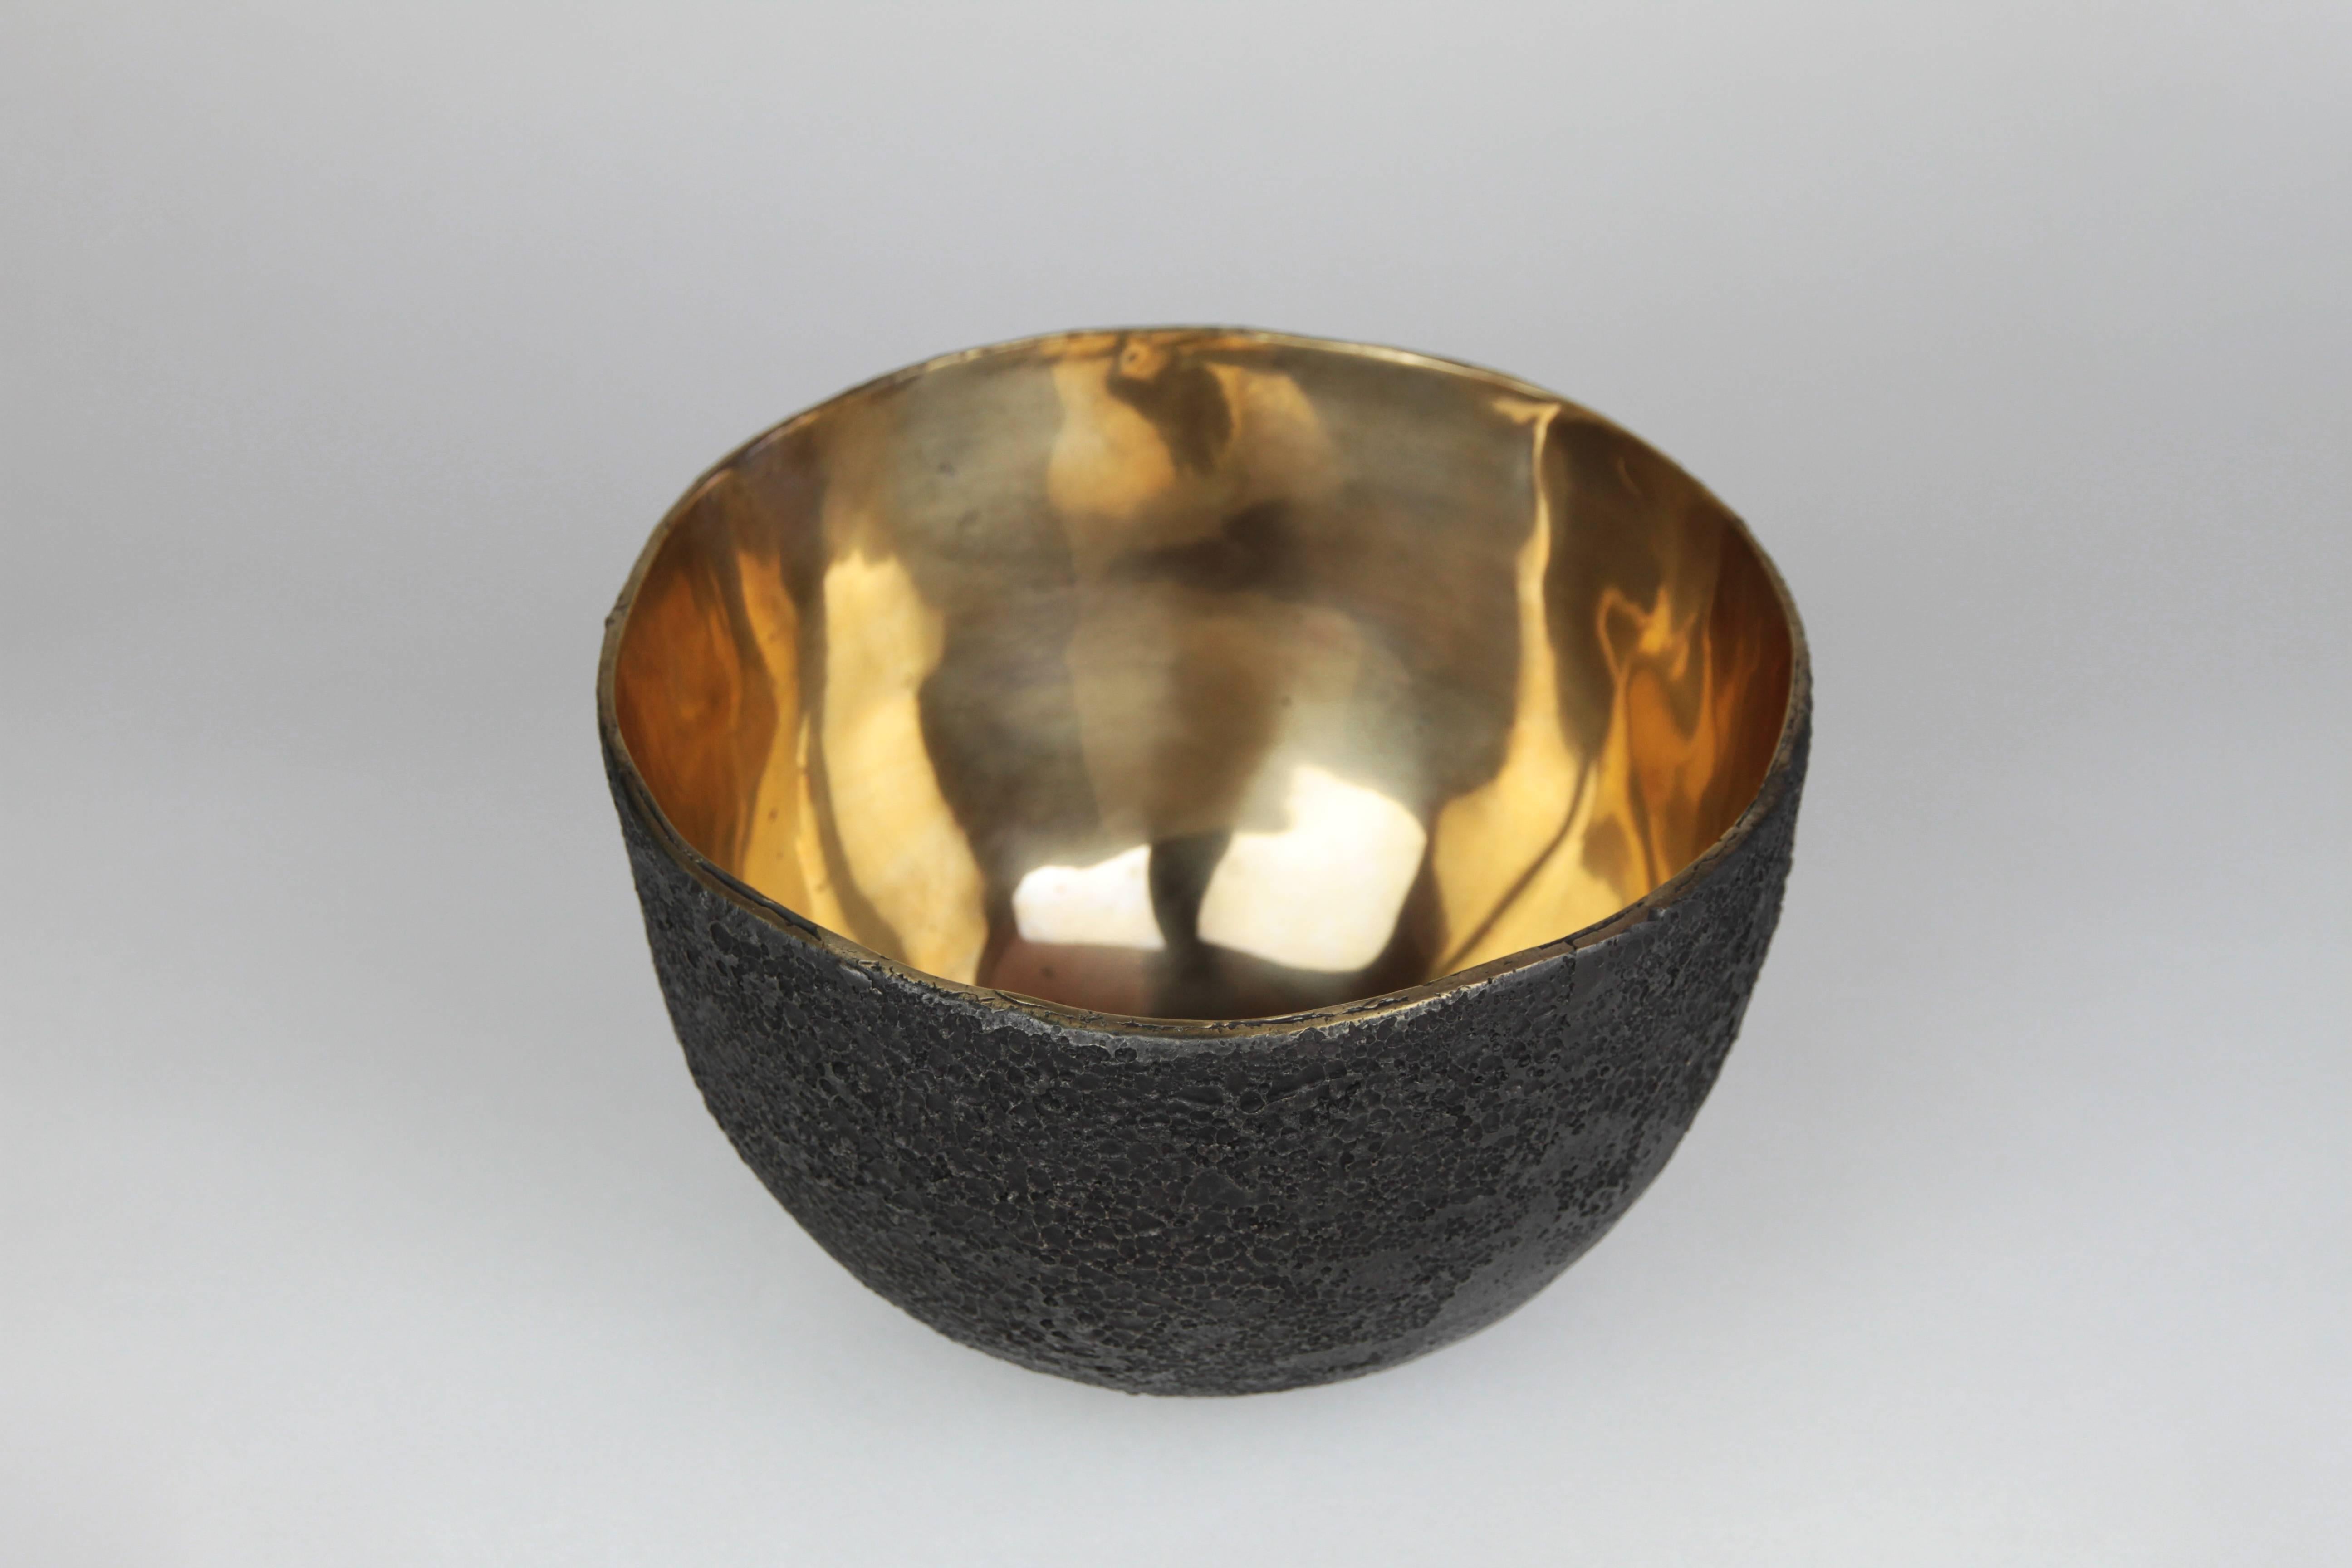 The crater bowl is the theoretical shape a Meteorite may have formed when crashing into lava rock. The hand-carved original was cast in bronze and patinated on the outside with a high polished exterior. The outside of the heavy bowl has the texture